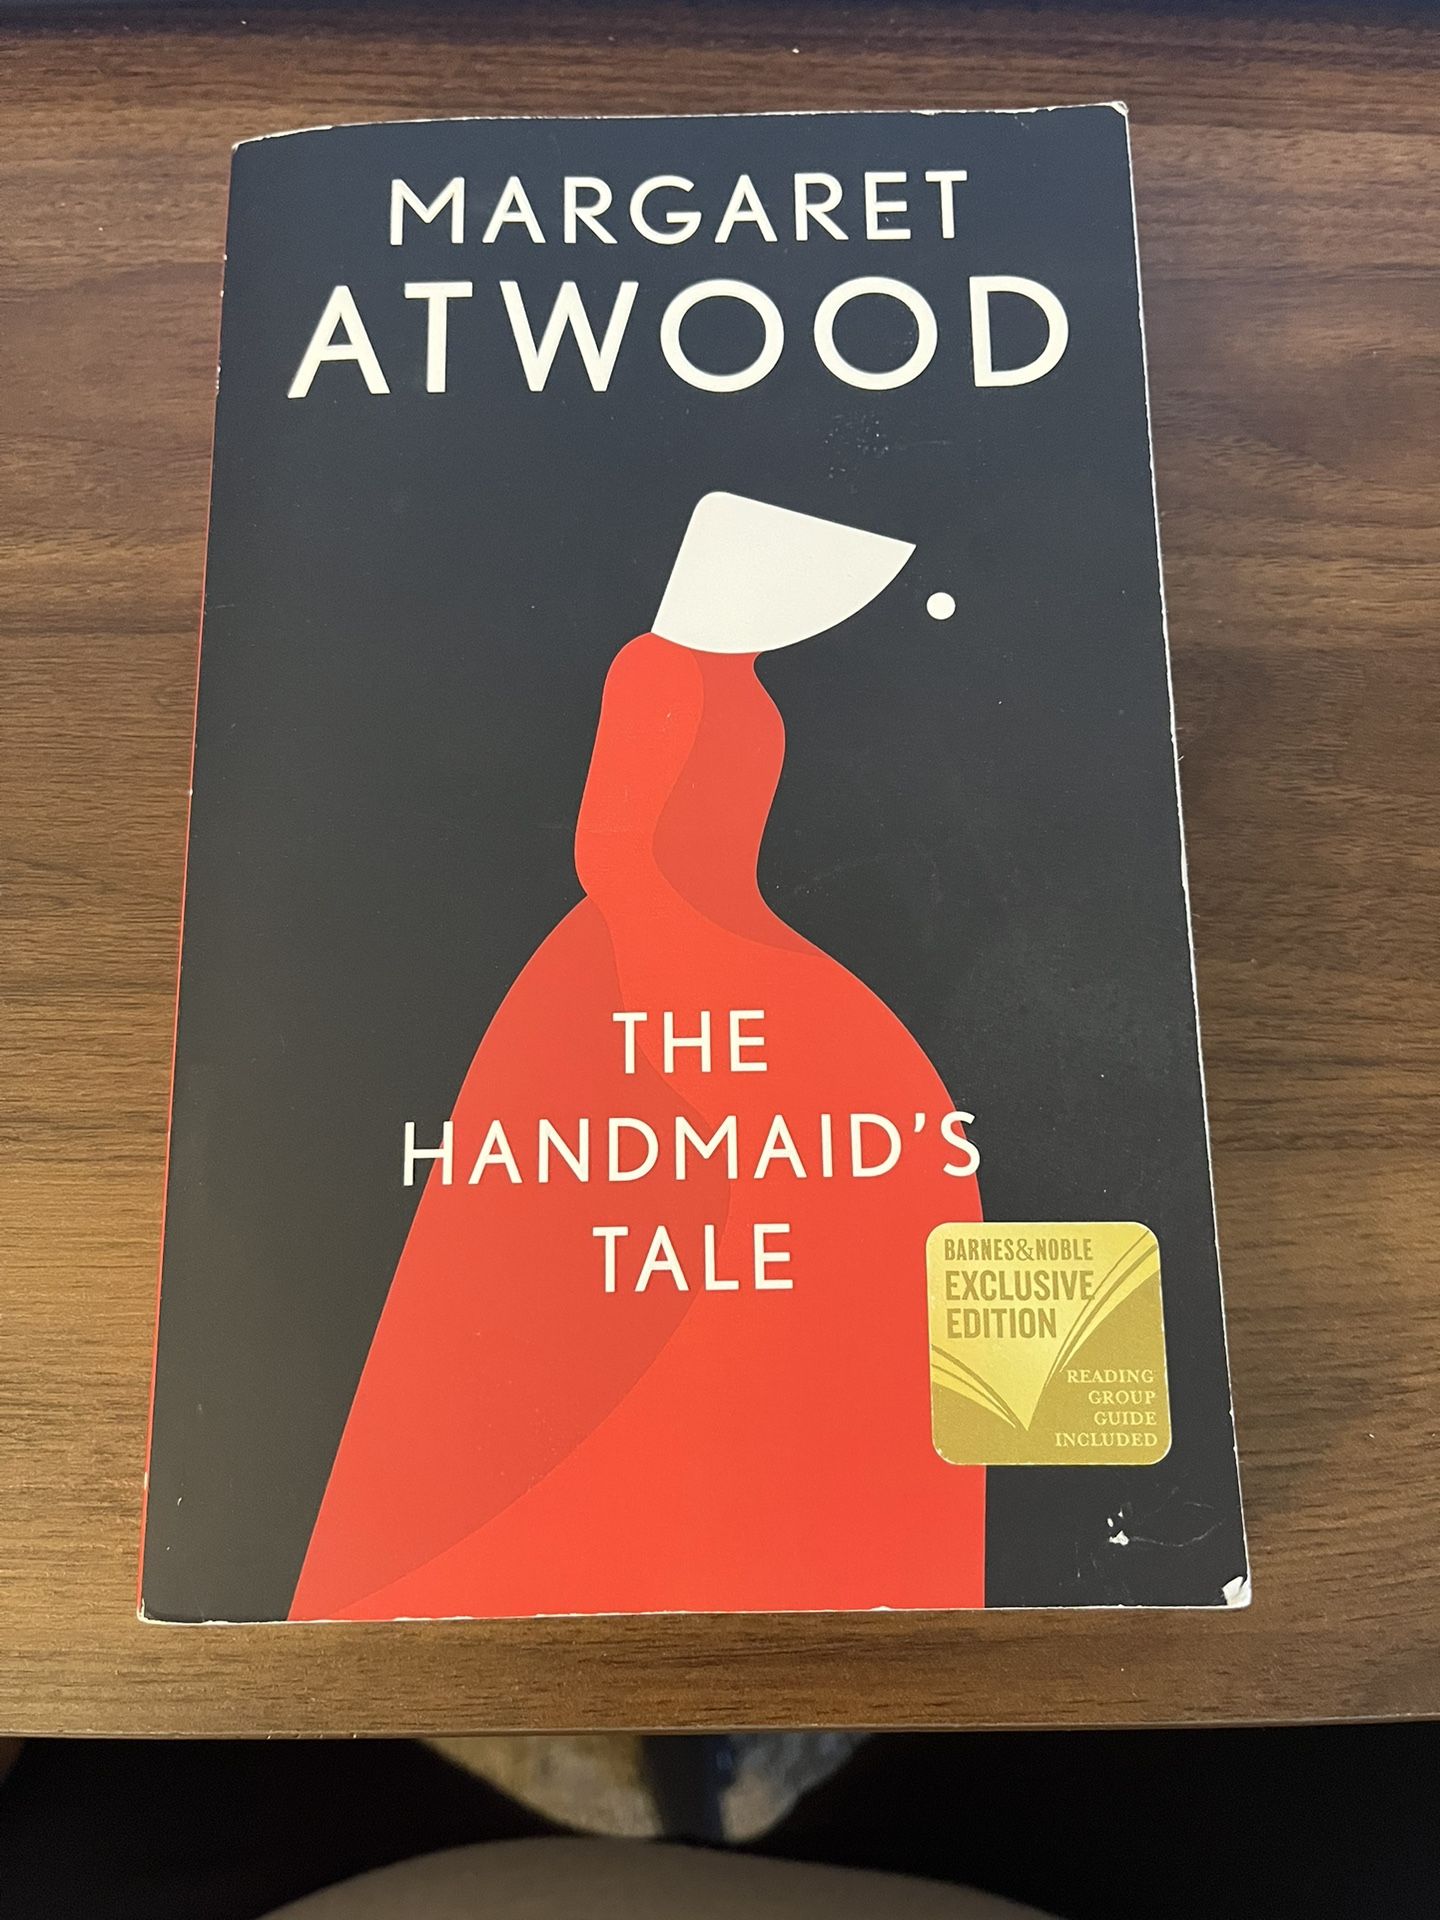 Paperback Copy Of The Handmaid’s Tale By Margret Atwood